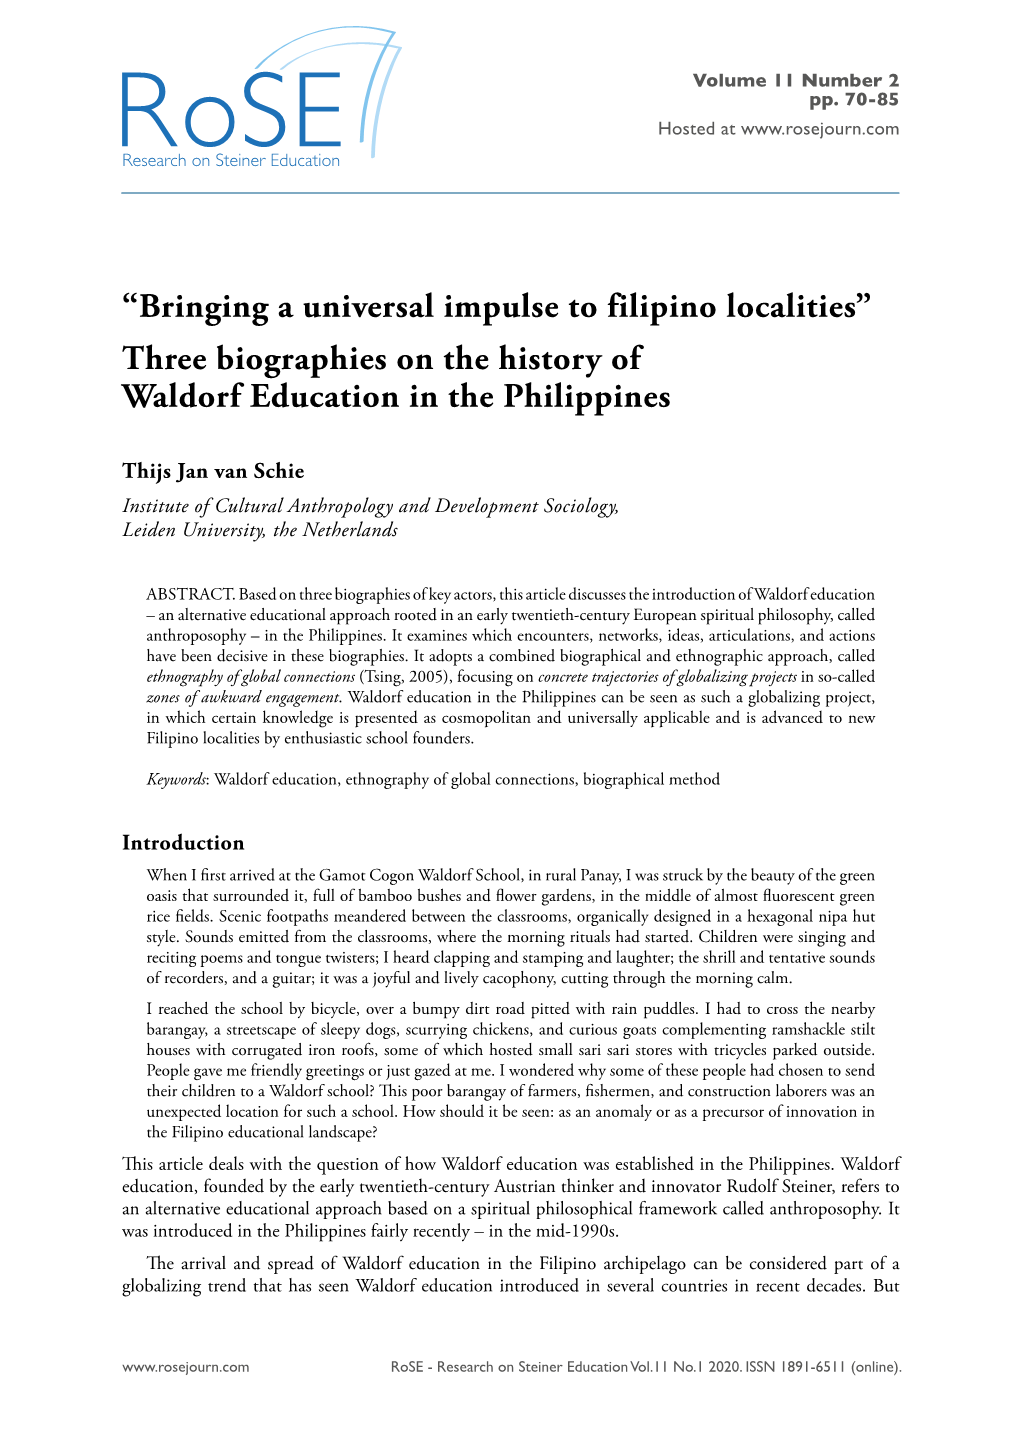 “Bringing a Universal Impulse to Filipino Localities” Three Biographies on the History of Waldorf Education in the Philippines